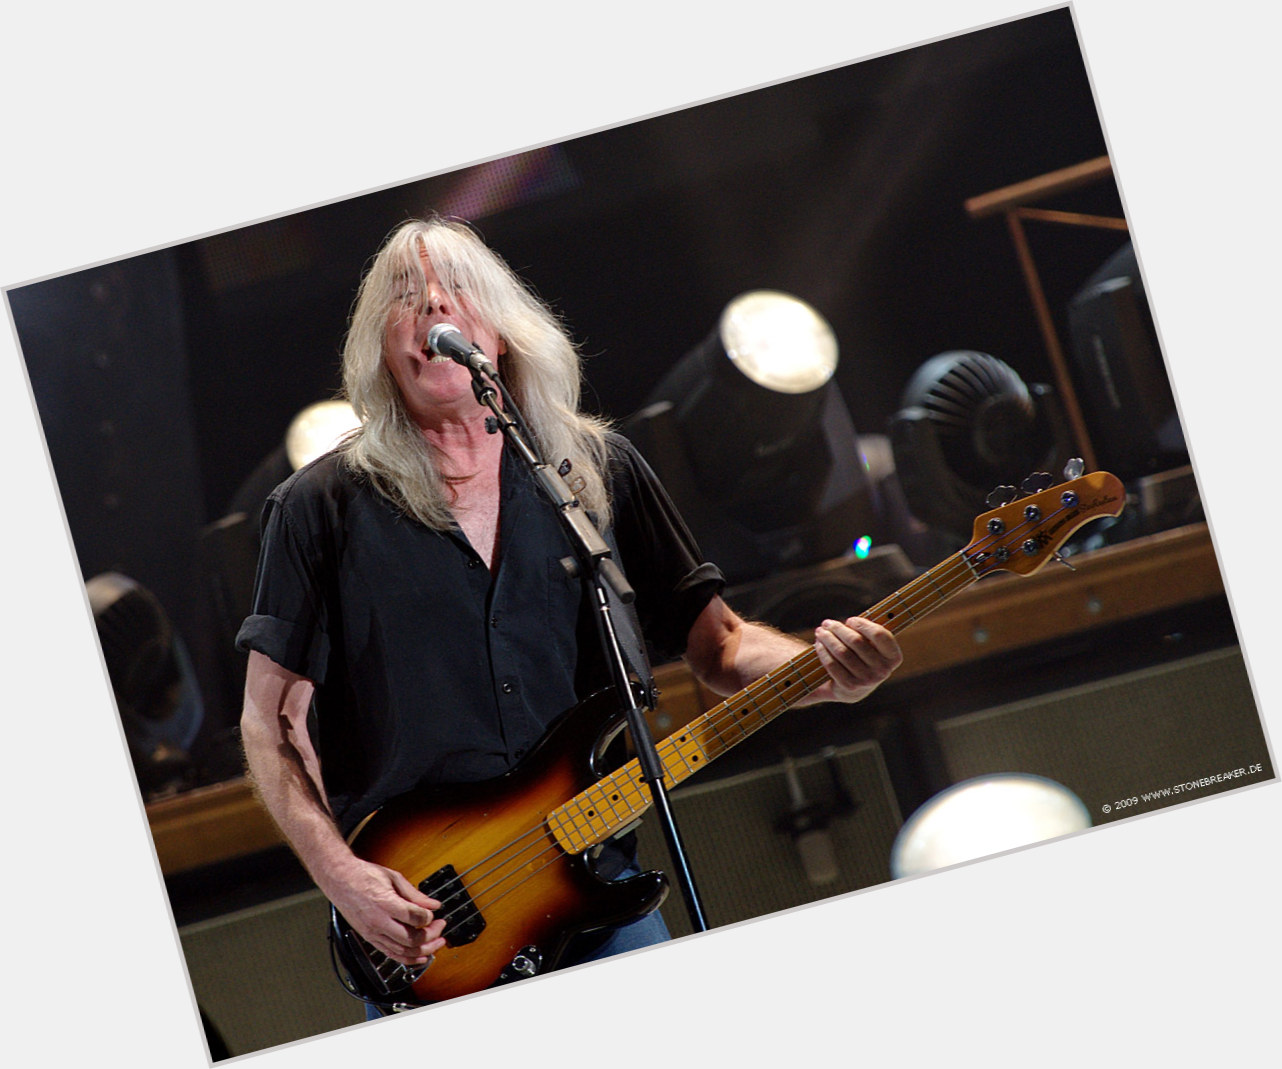 Https://fanpagepress.net/m/C/cliff Williams Young 1